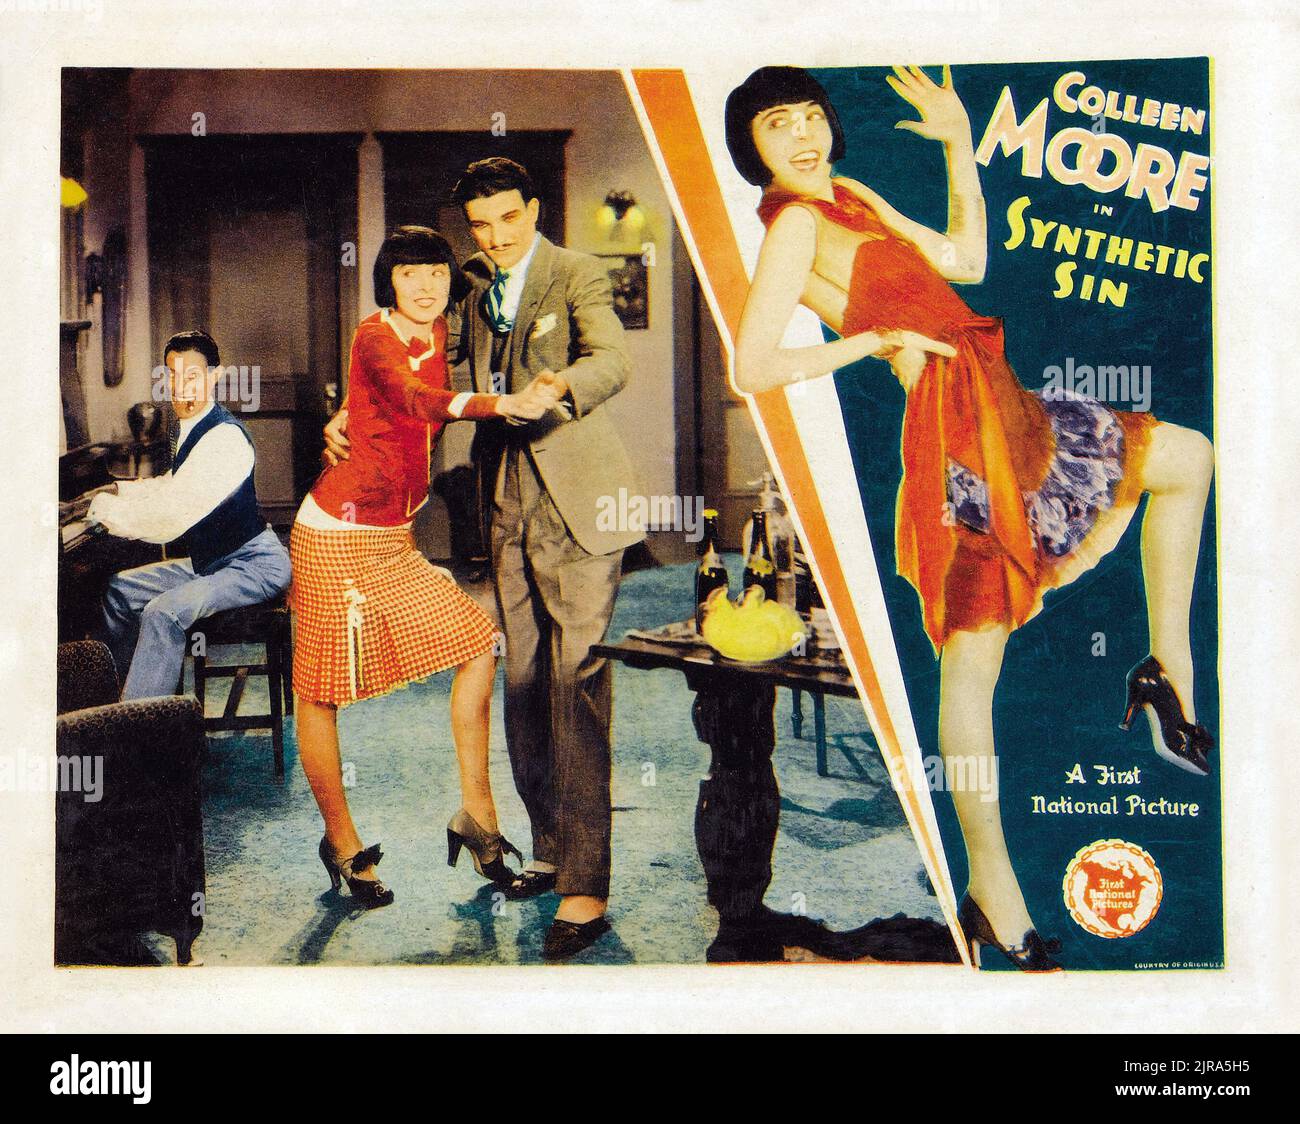 Colleen Moore - Synthetic Sin (First National, 1929) lobby card. Vintage film advertisement. Stock Photo